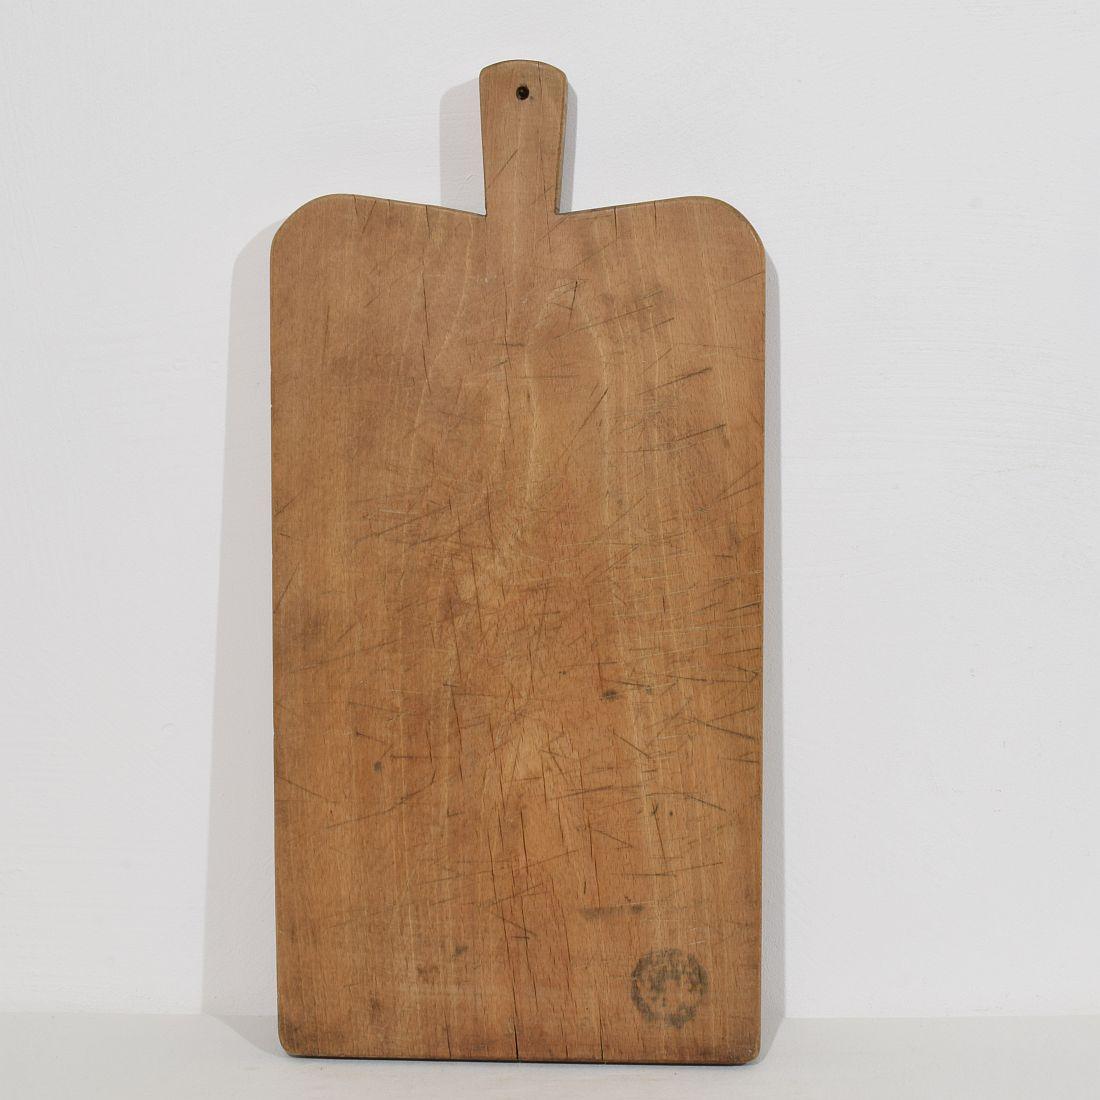 French Provincial Collection of Three Rare French, 19th Century, Wooden Chopping or Cutting Boards For Sale